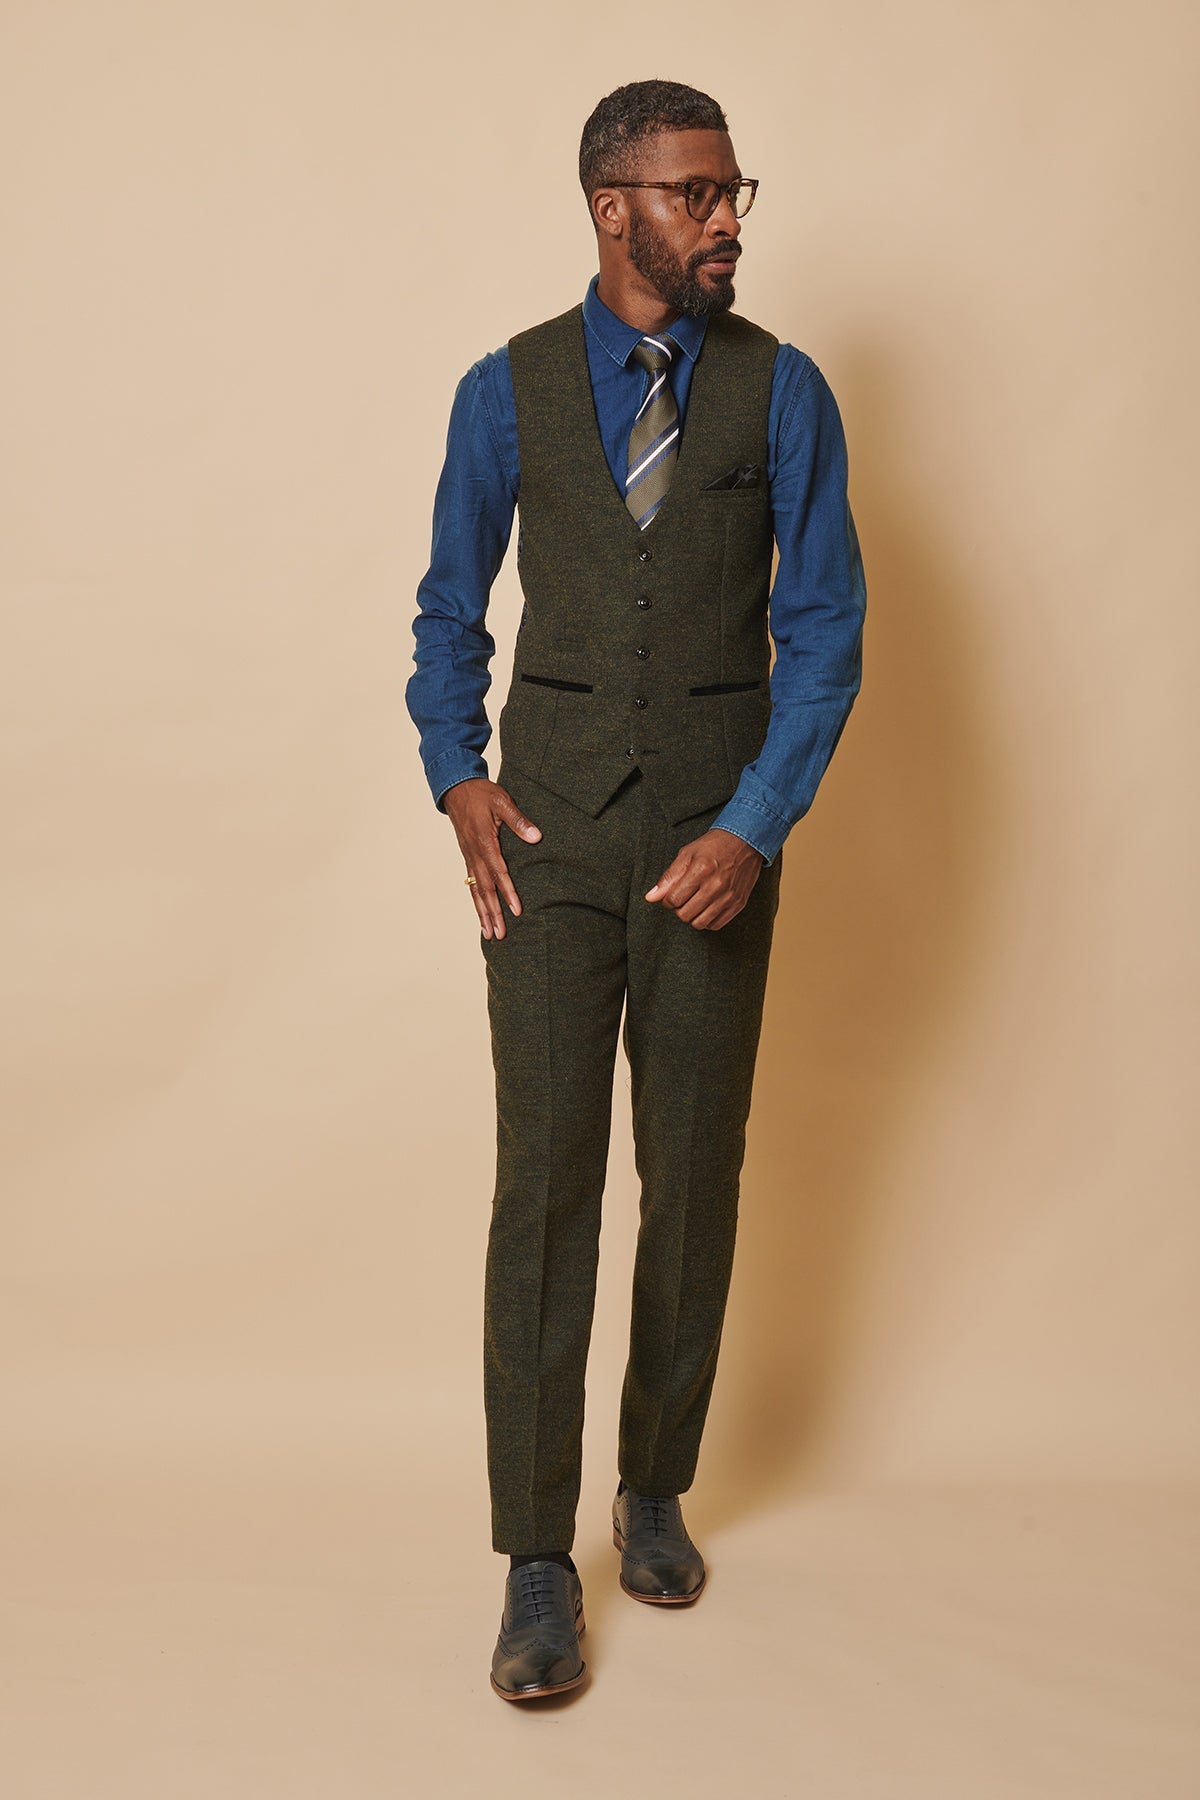 The WHU Collection - MARLOW Olive Green Tweed Three Piece Suit As Worn By Aaron Cresswell